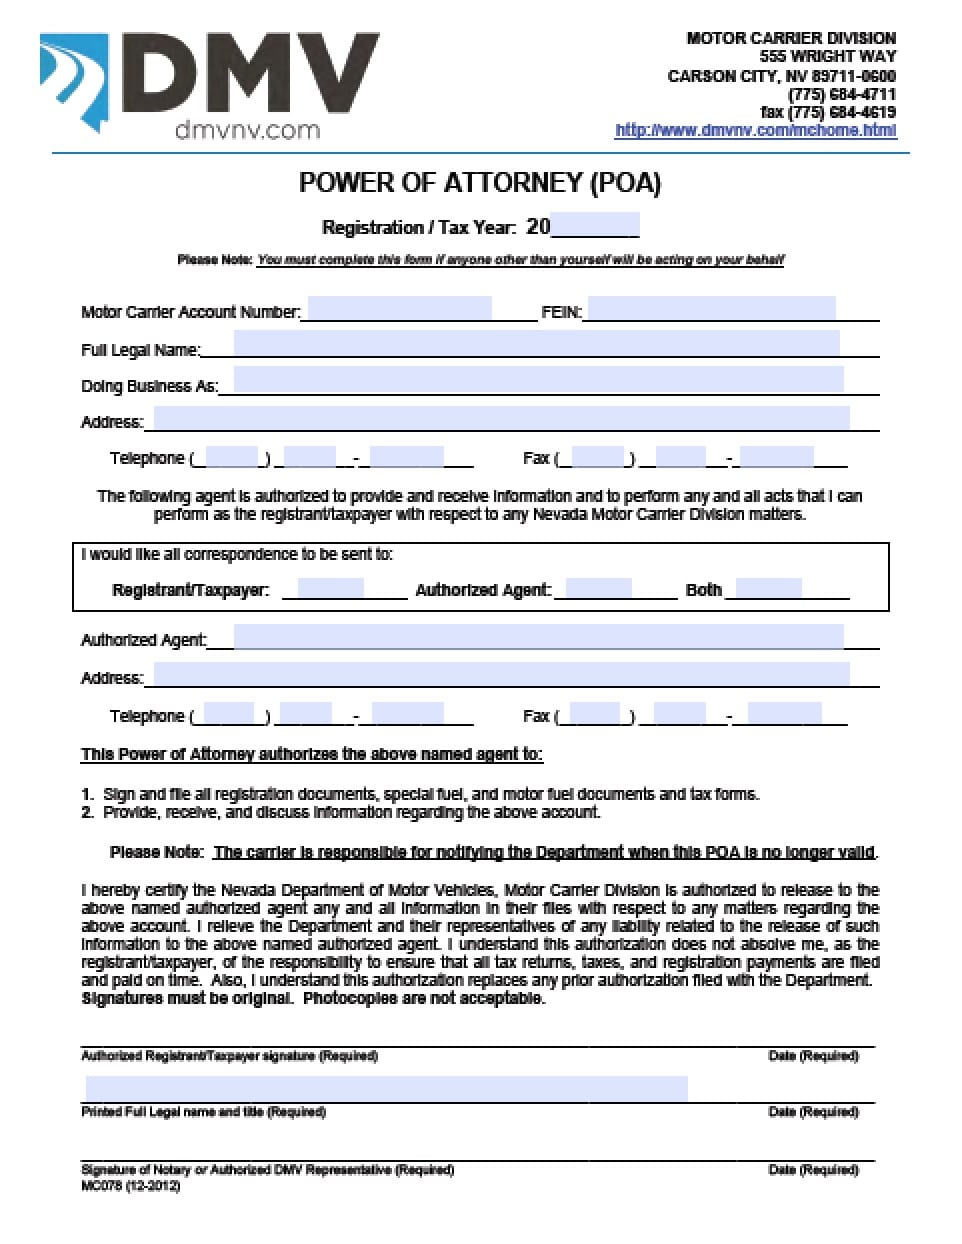 Nevada Vehicle Power Of Attorney Form Power Of Attorney Power Of Attorney